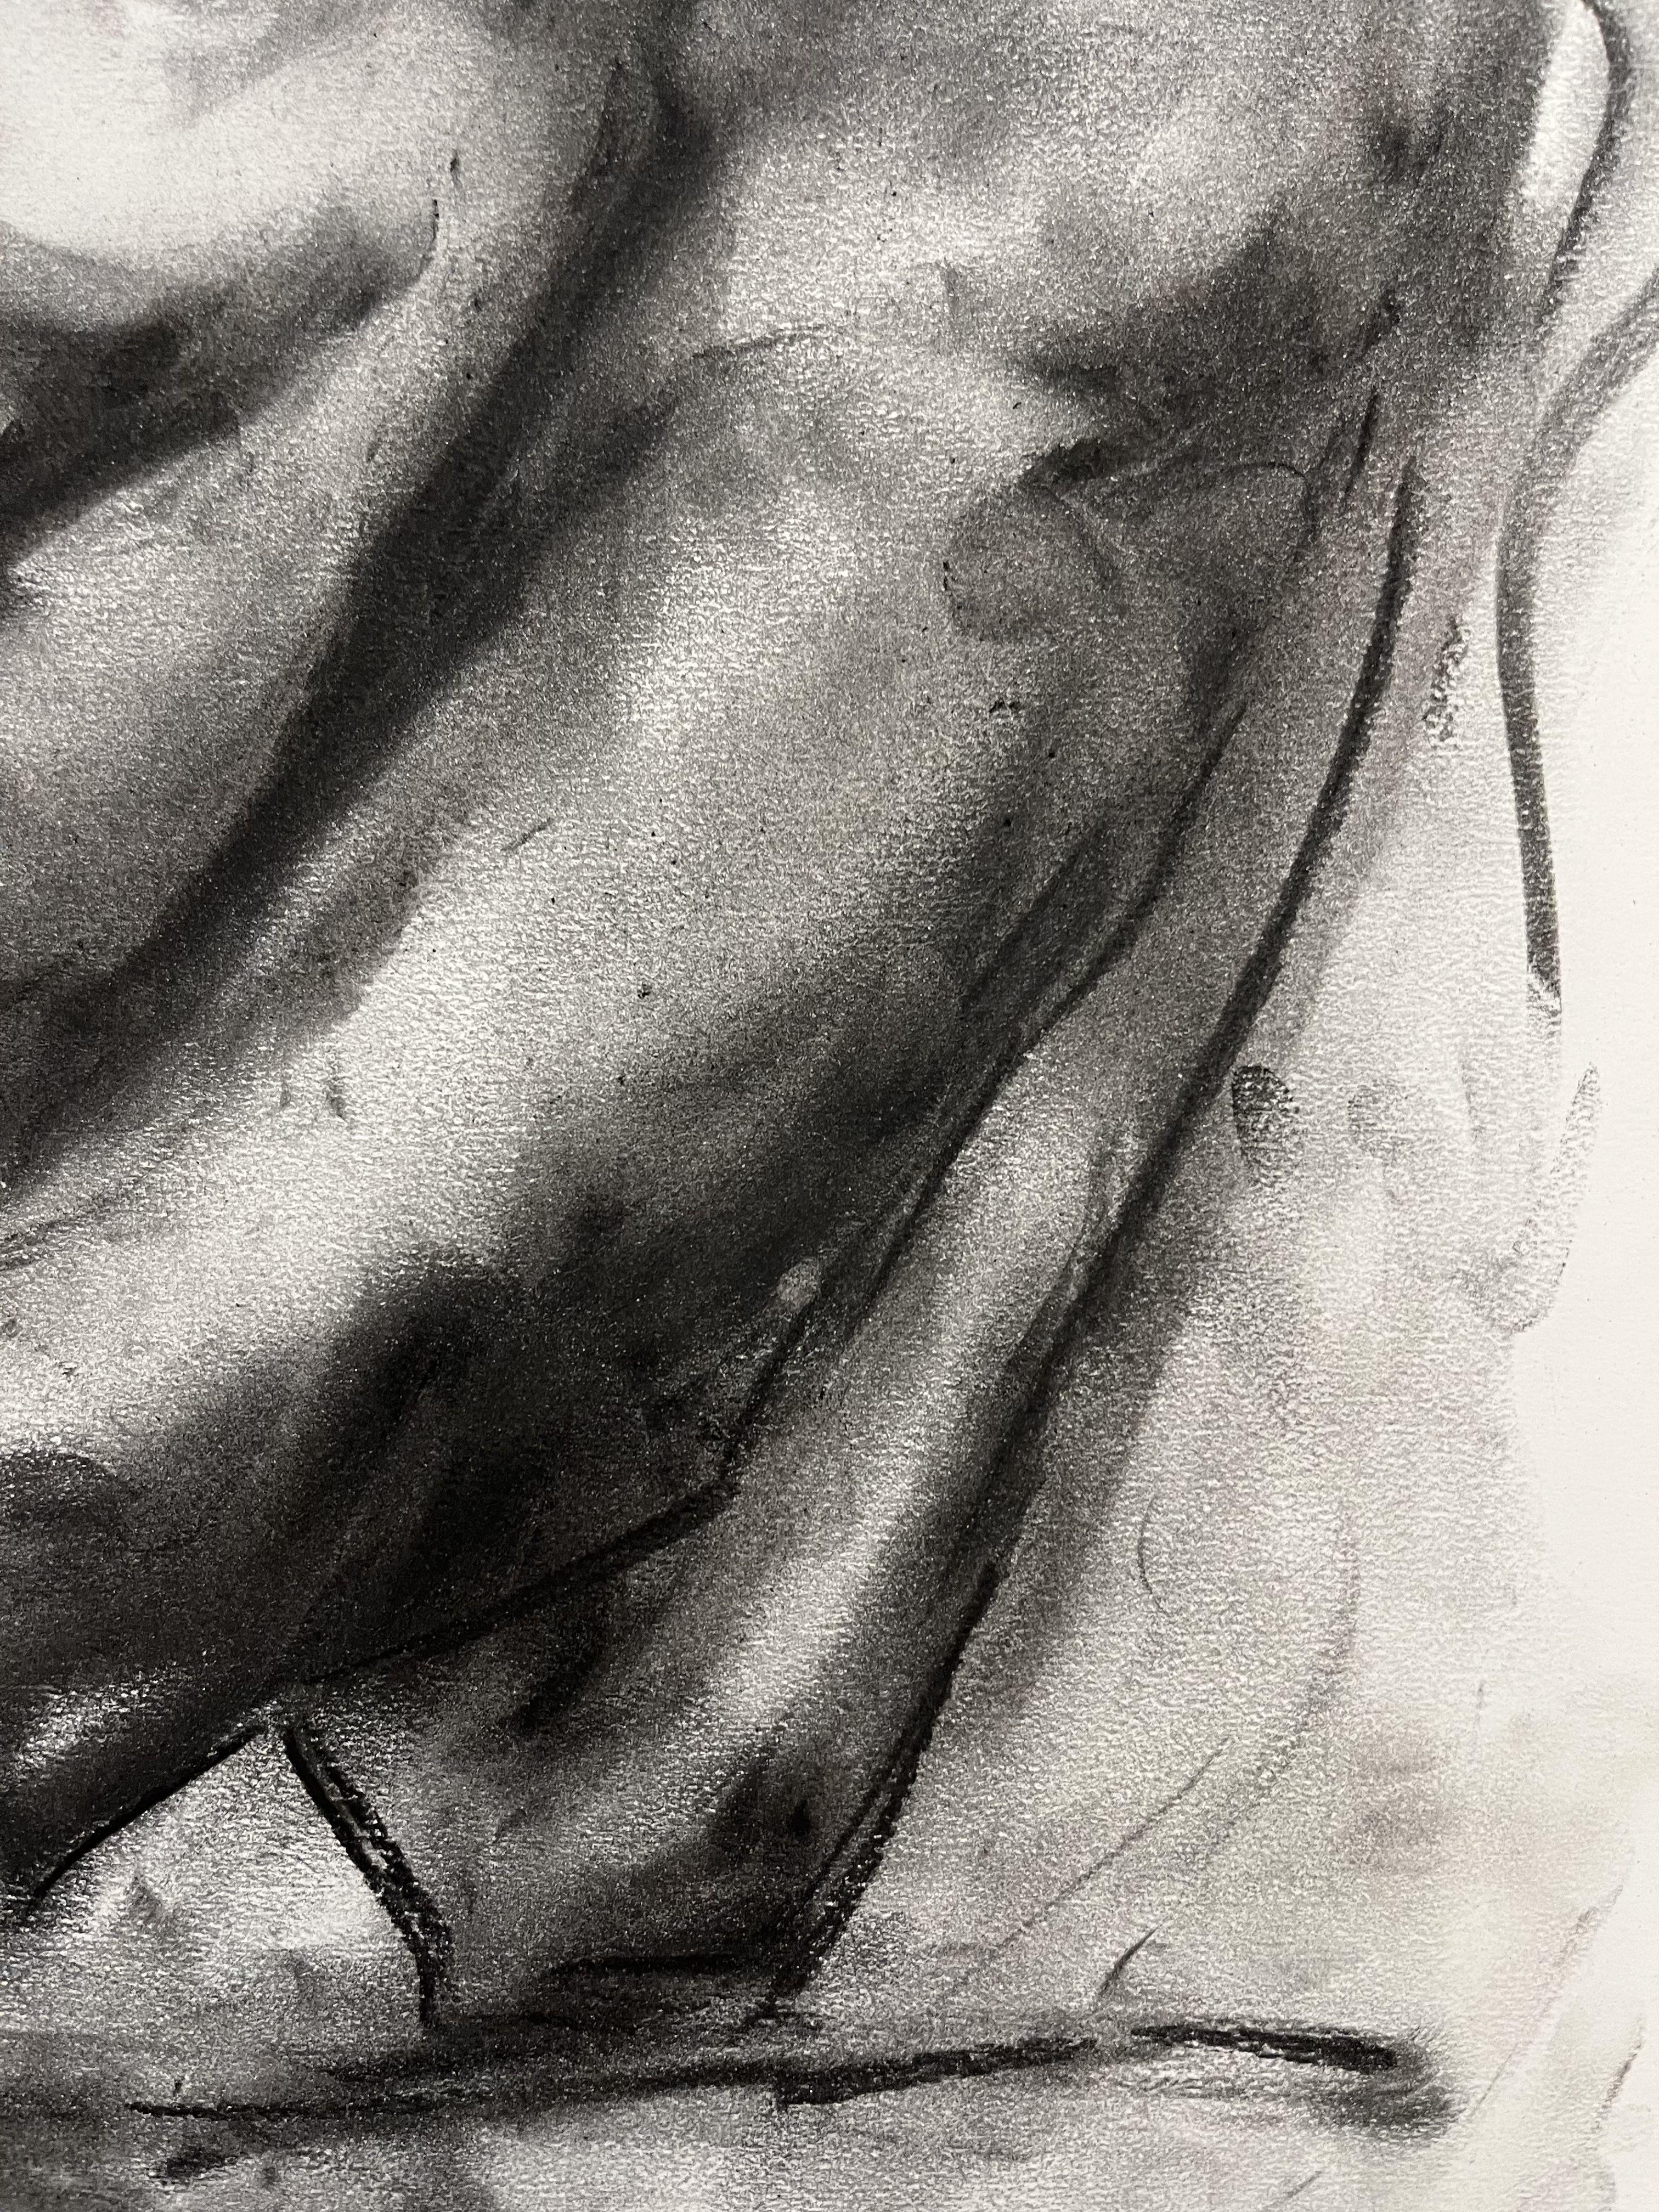 Hurt, Drawing, Charcoal on Paper - Impressionist Art by James Shipton